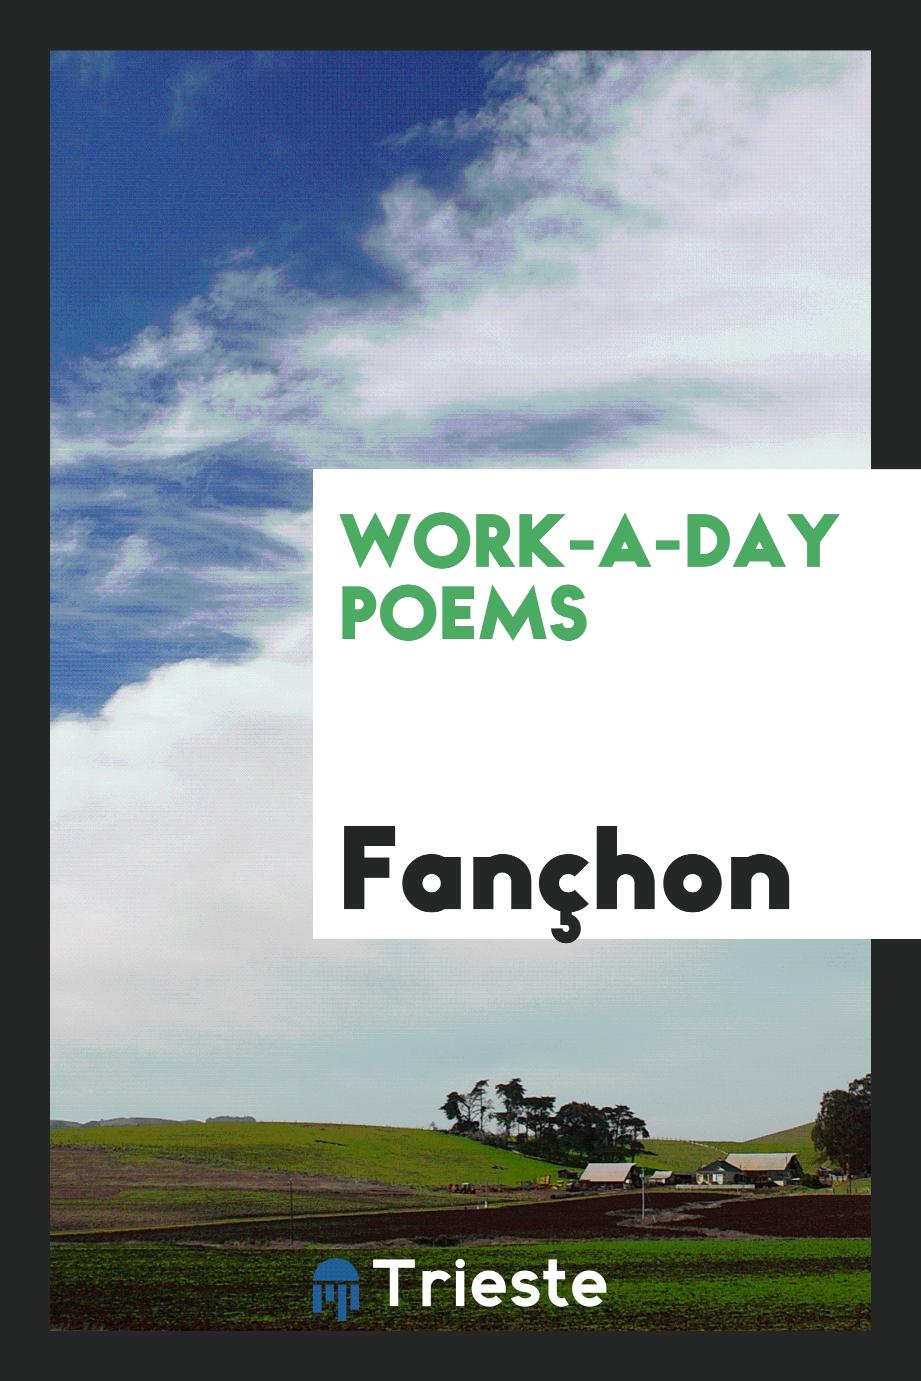 Work-a-day poems